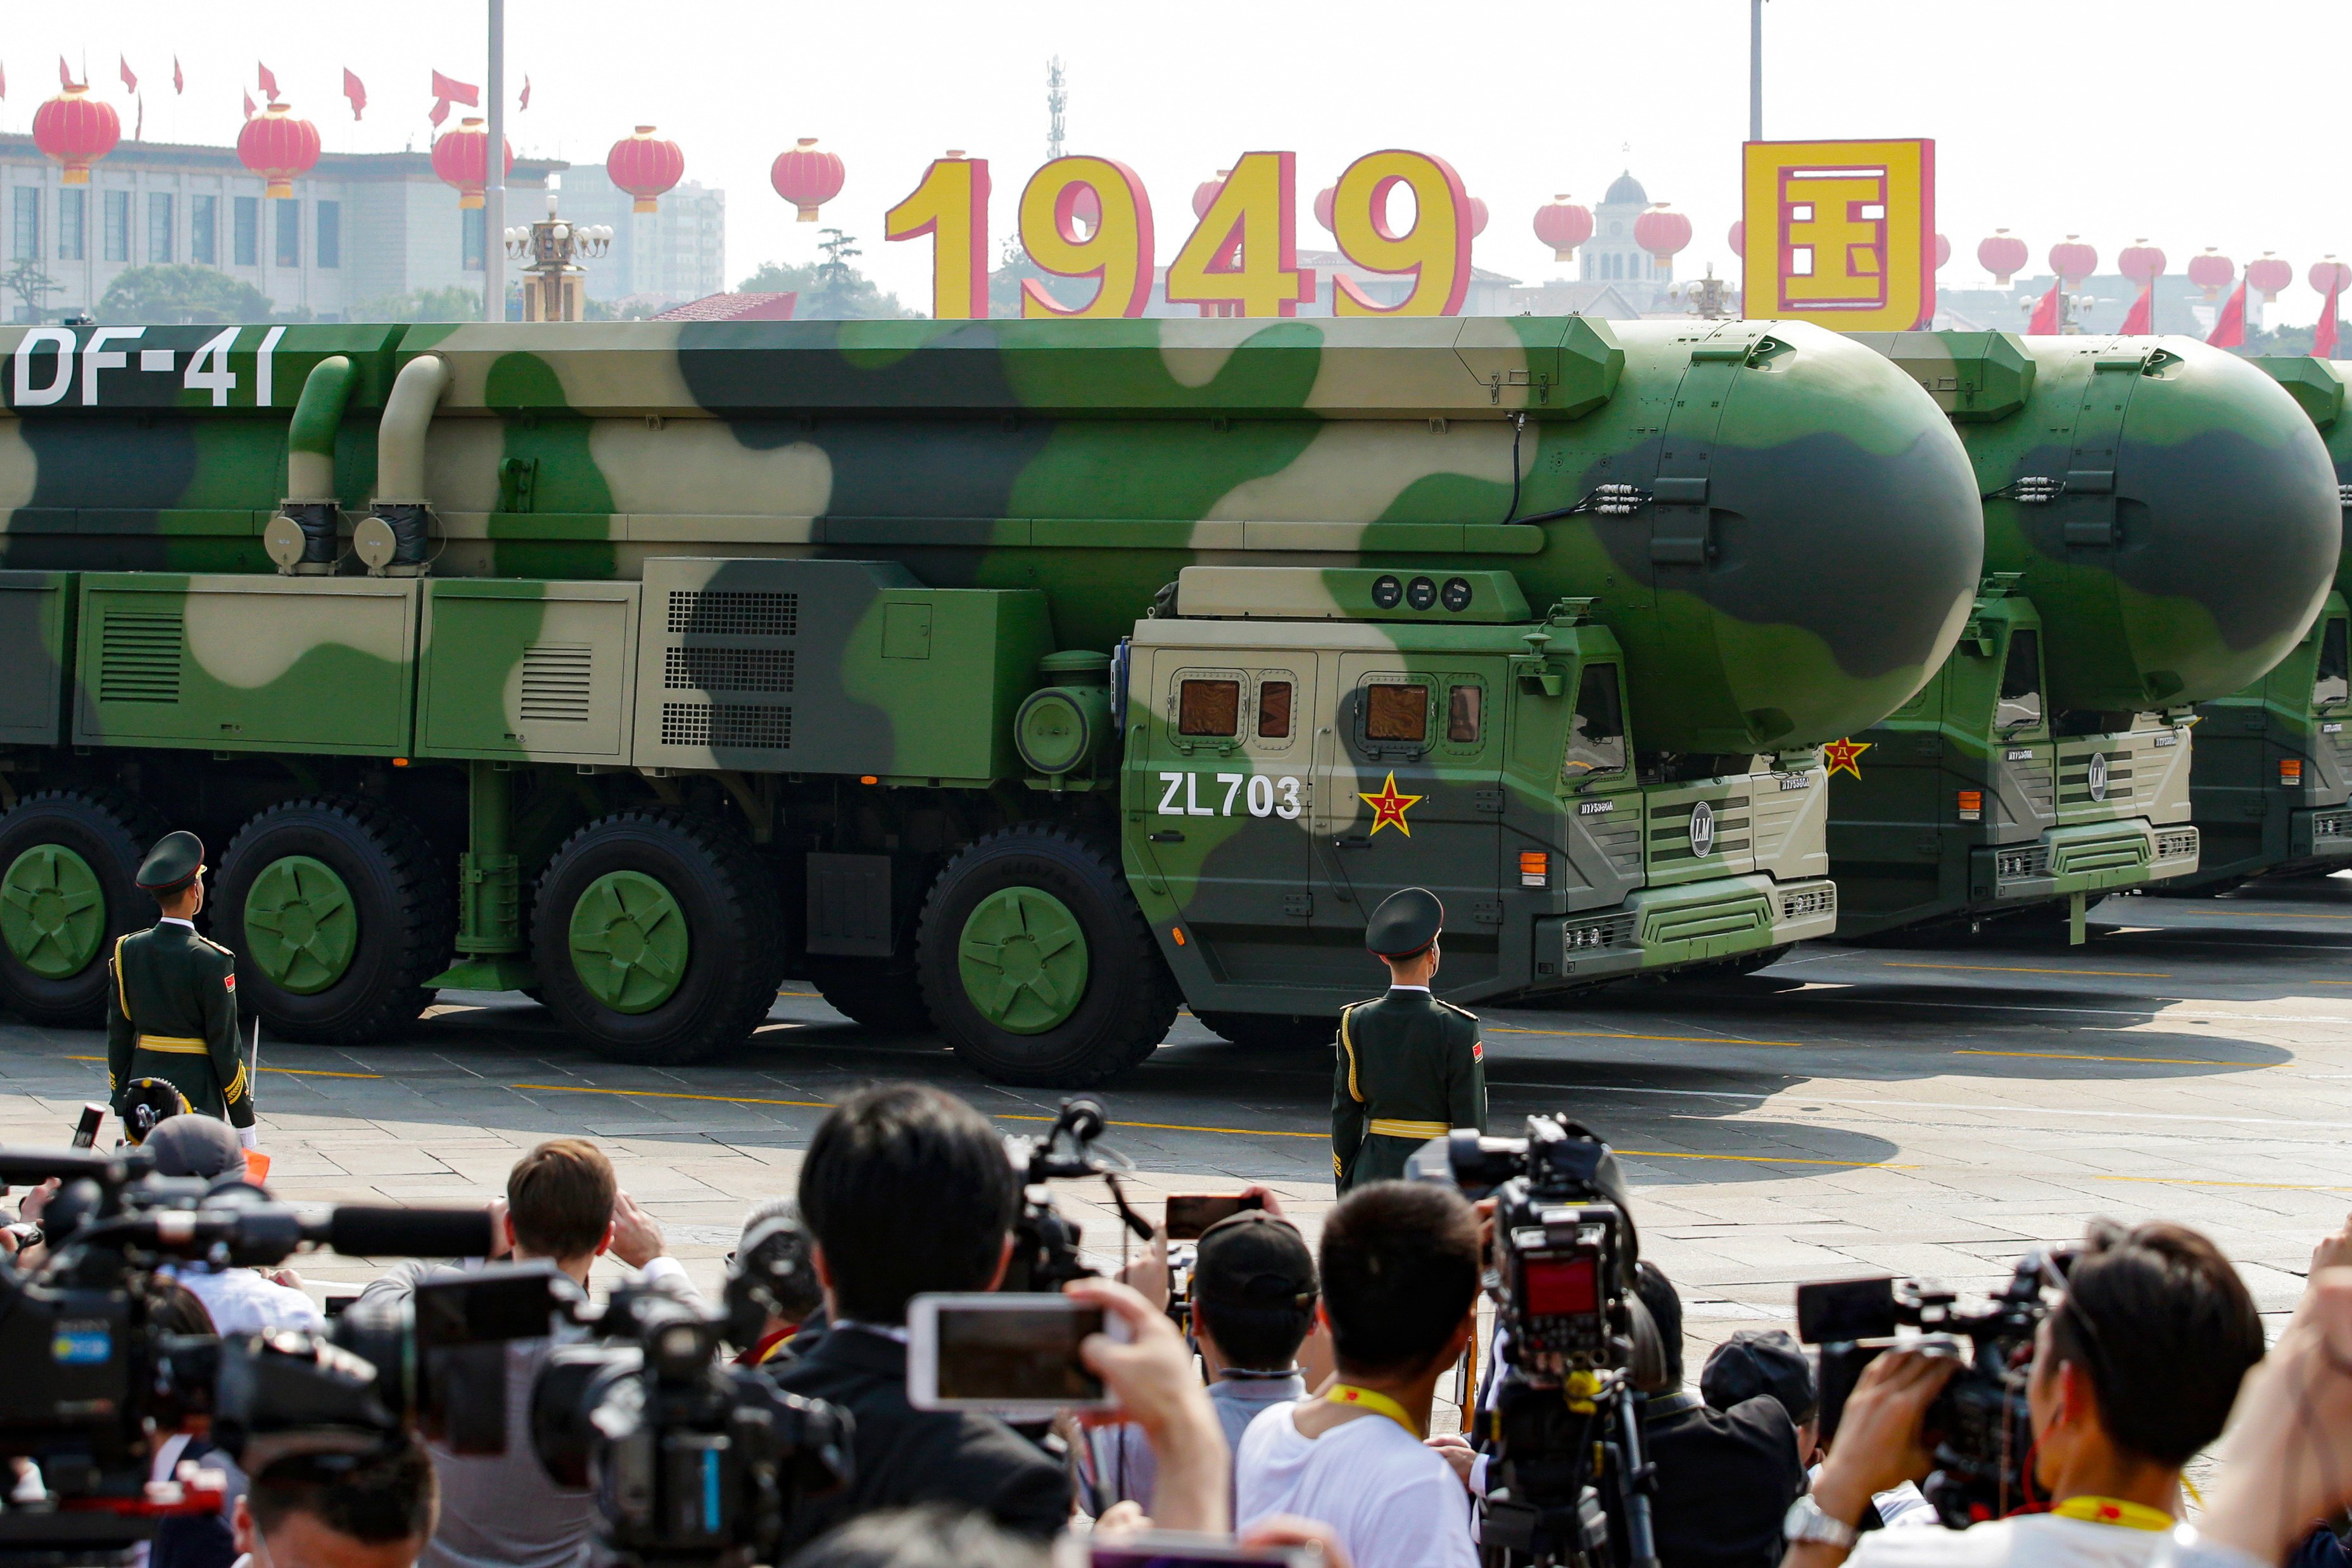 Chinese DF-41 intercontinental ballistic missiles pictured during a military parade in Beijing in 2019. China is now expanding its number of ICBMs, according to the report. Photo: Reuters